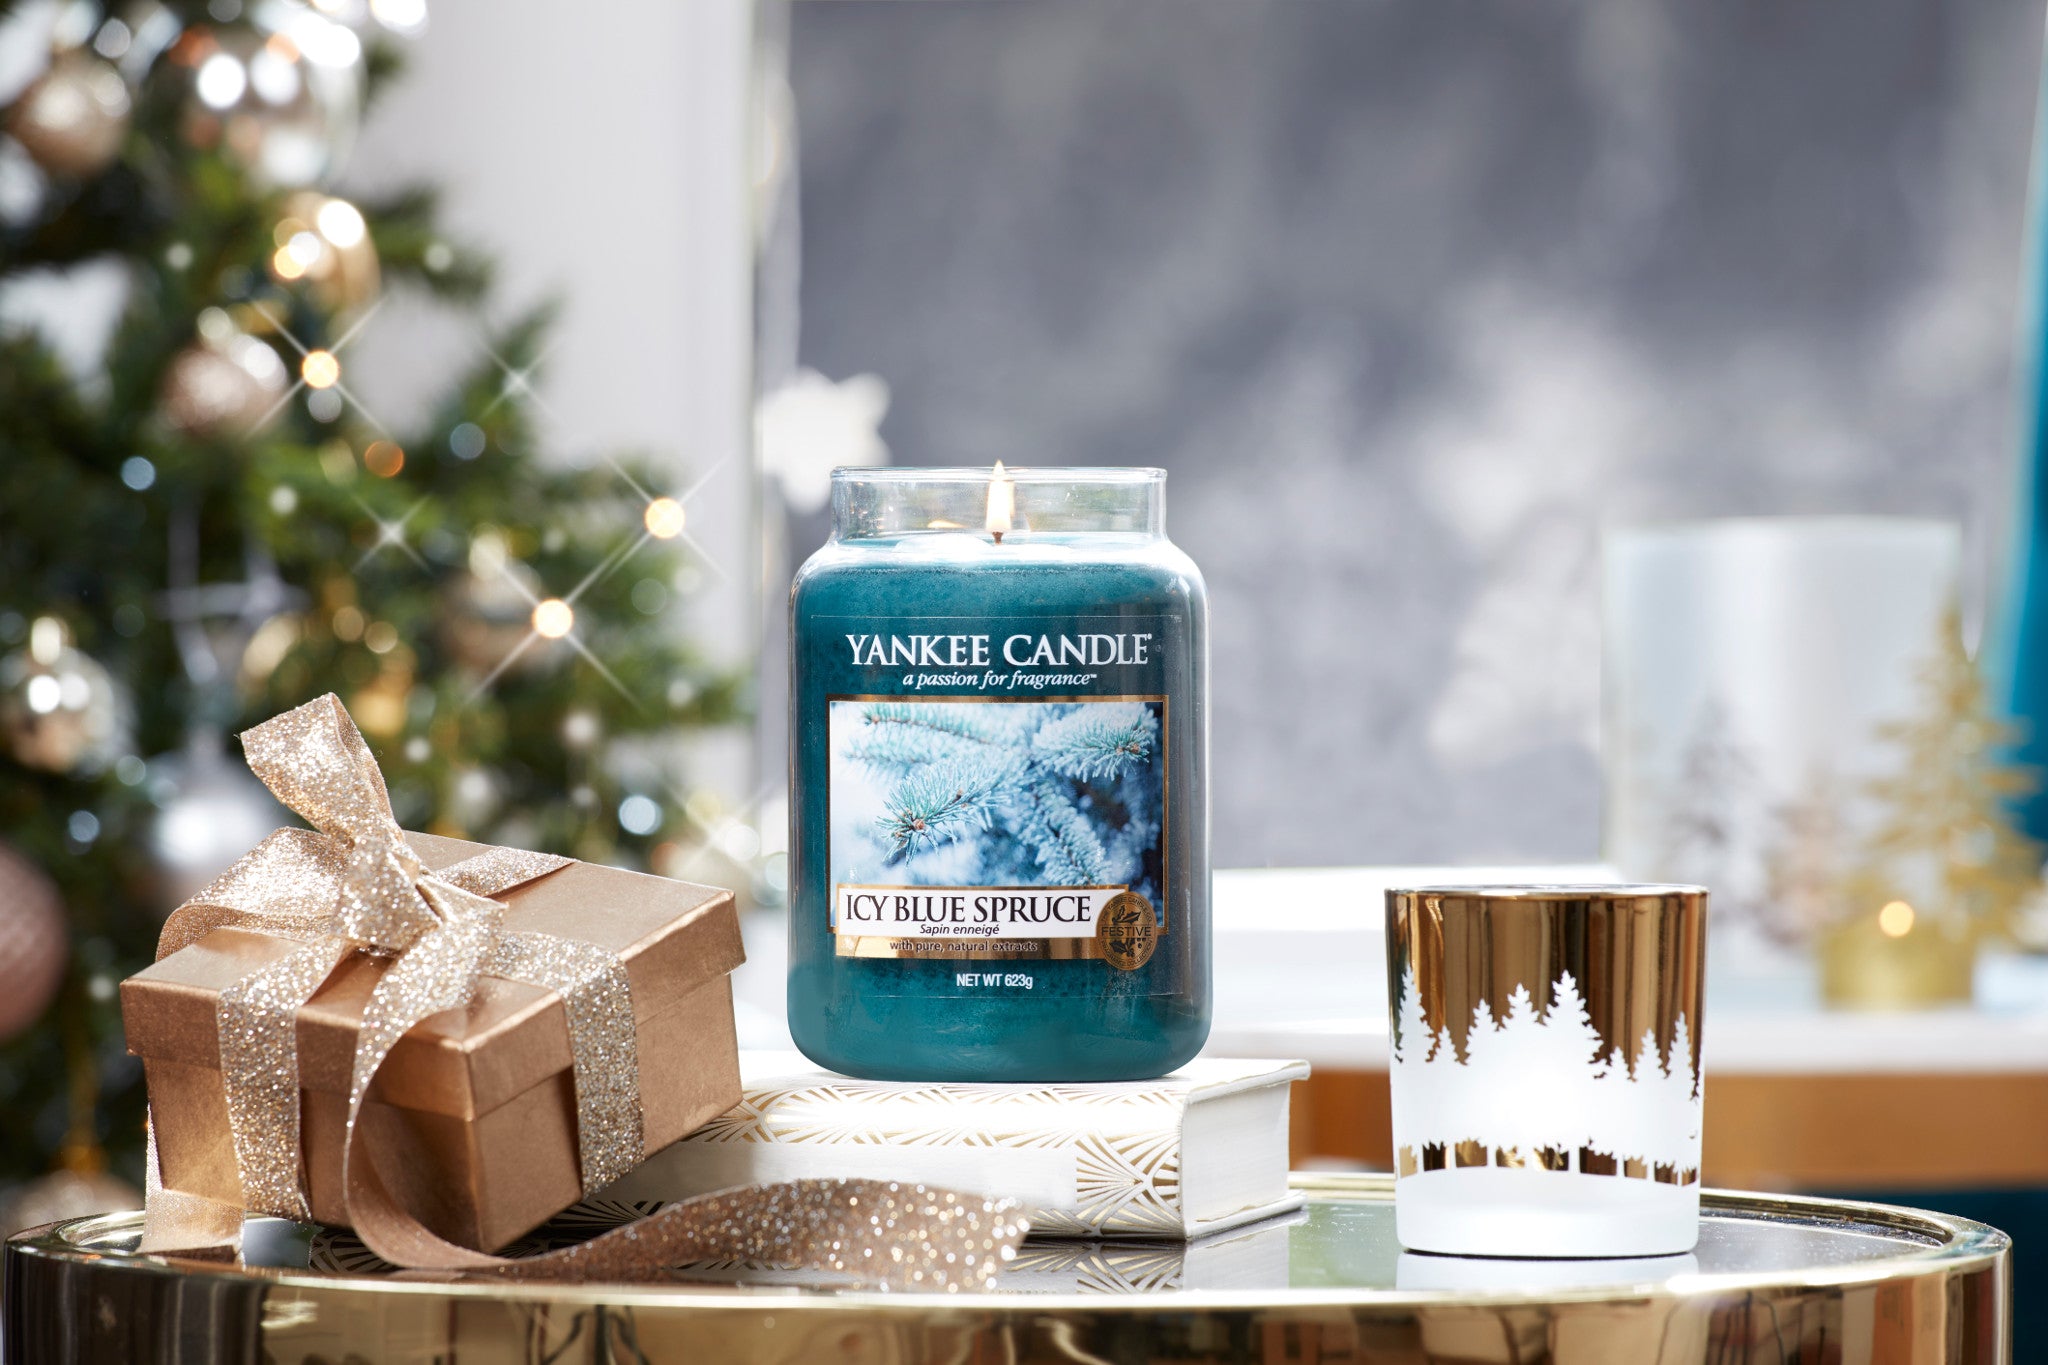 ICY BLUE SPRUCE -Yankee Candle- Tart